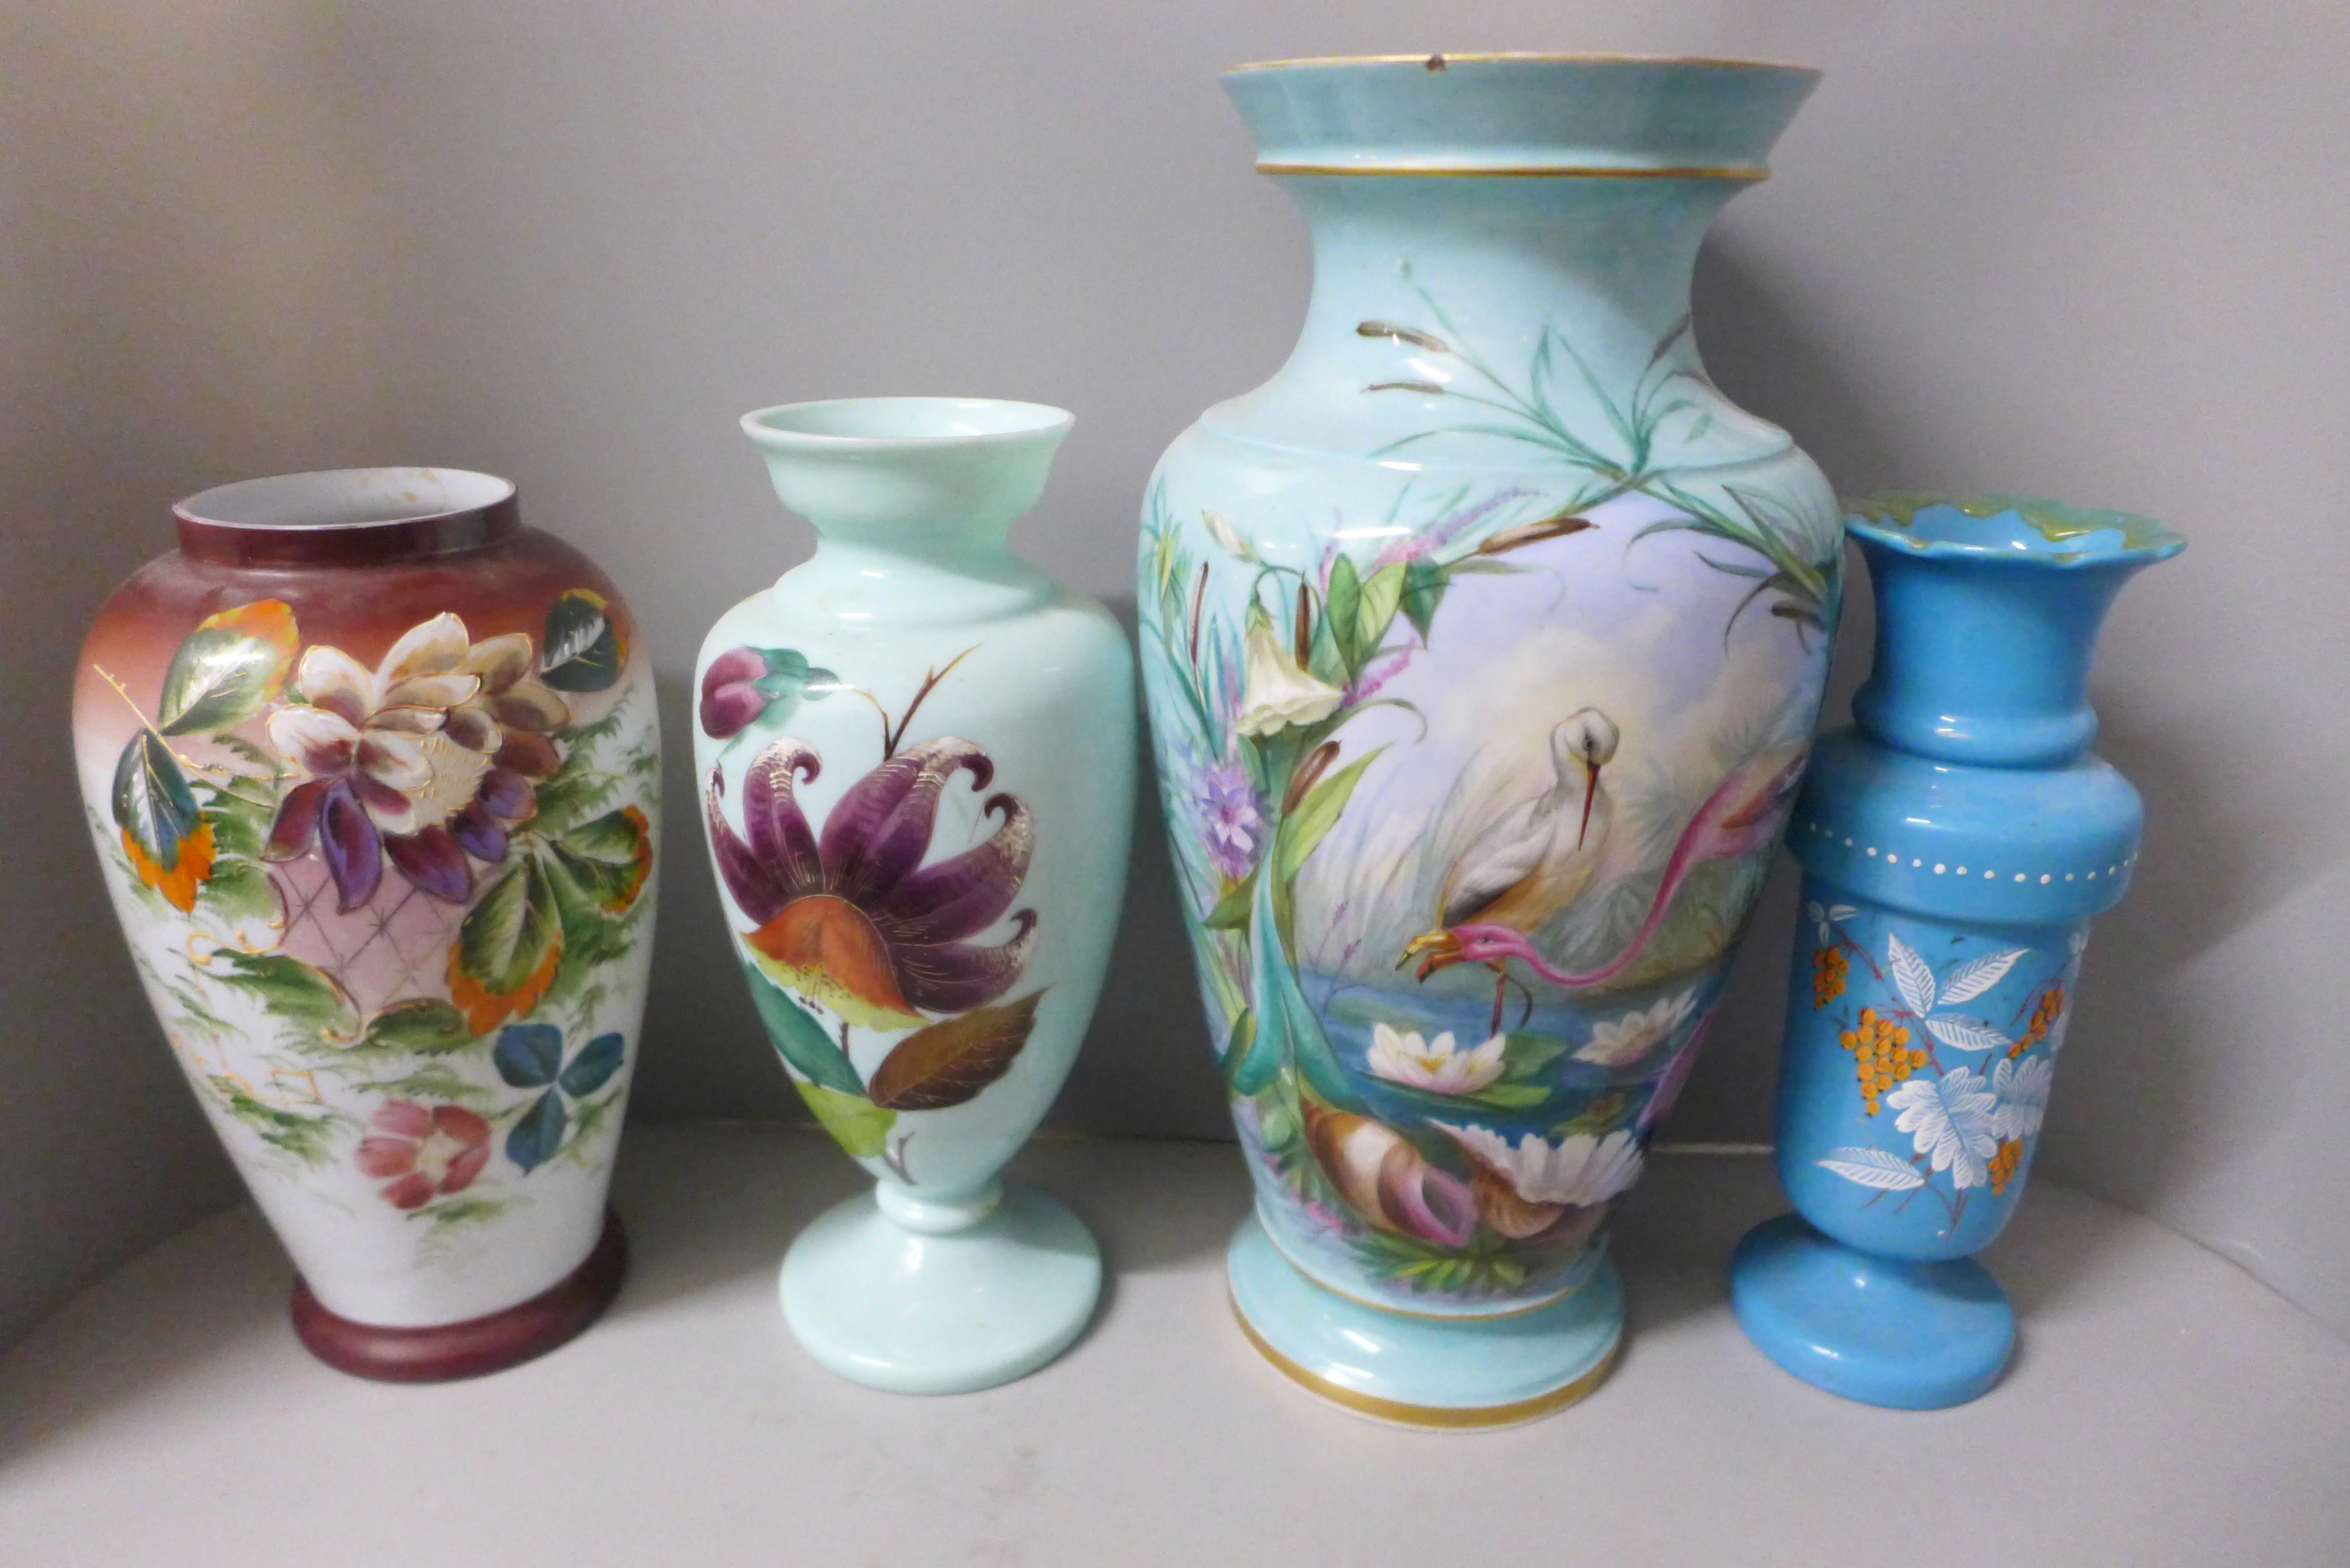 Three hand painted opaline glass vases and one large 19th Century blue glass vase decorated with